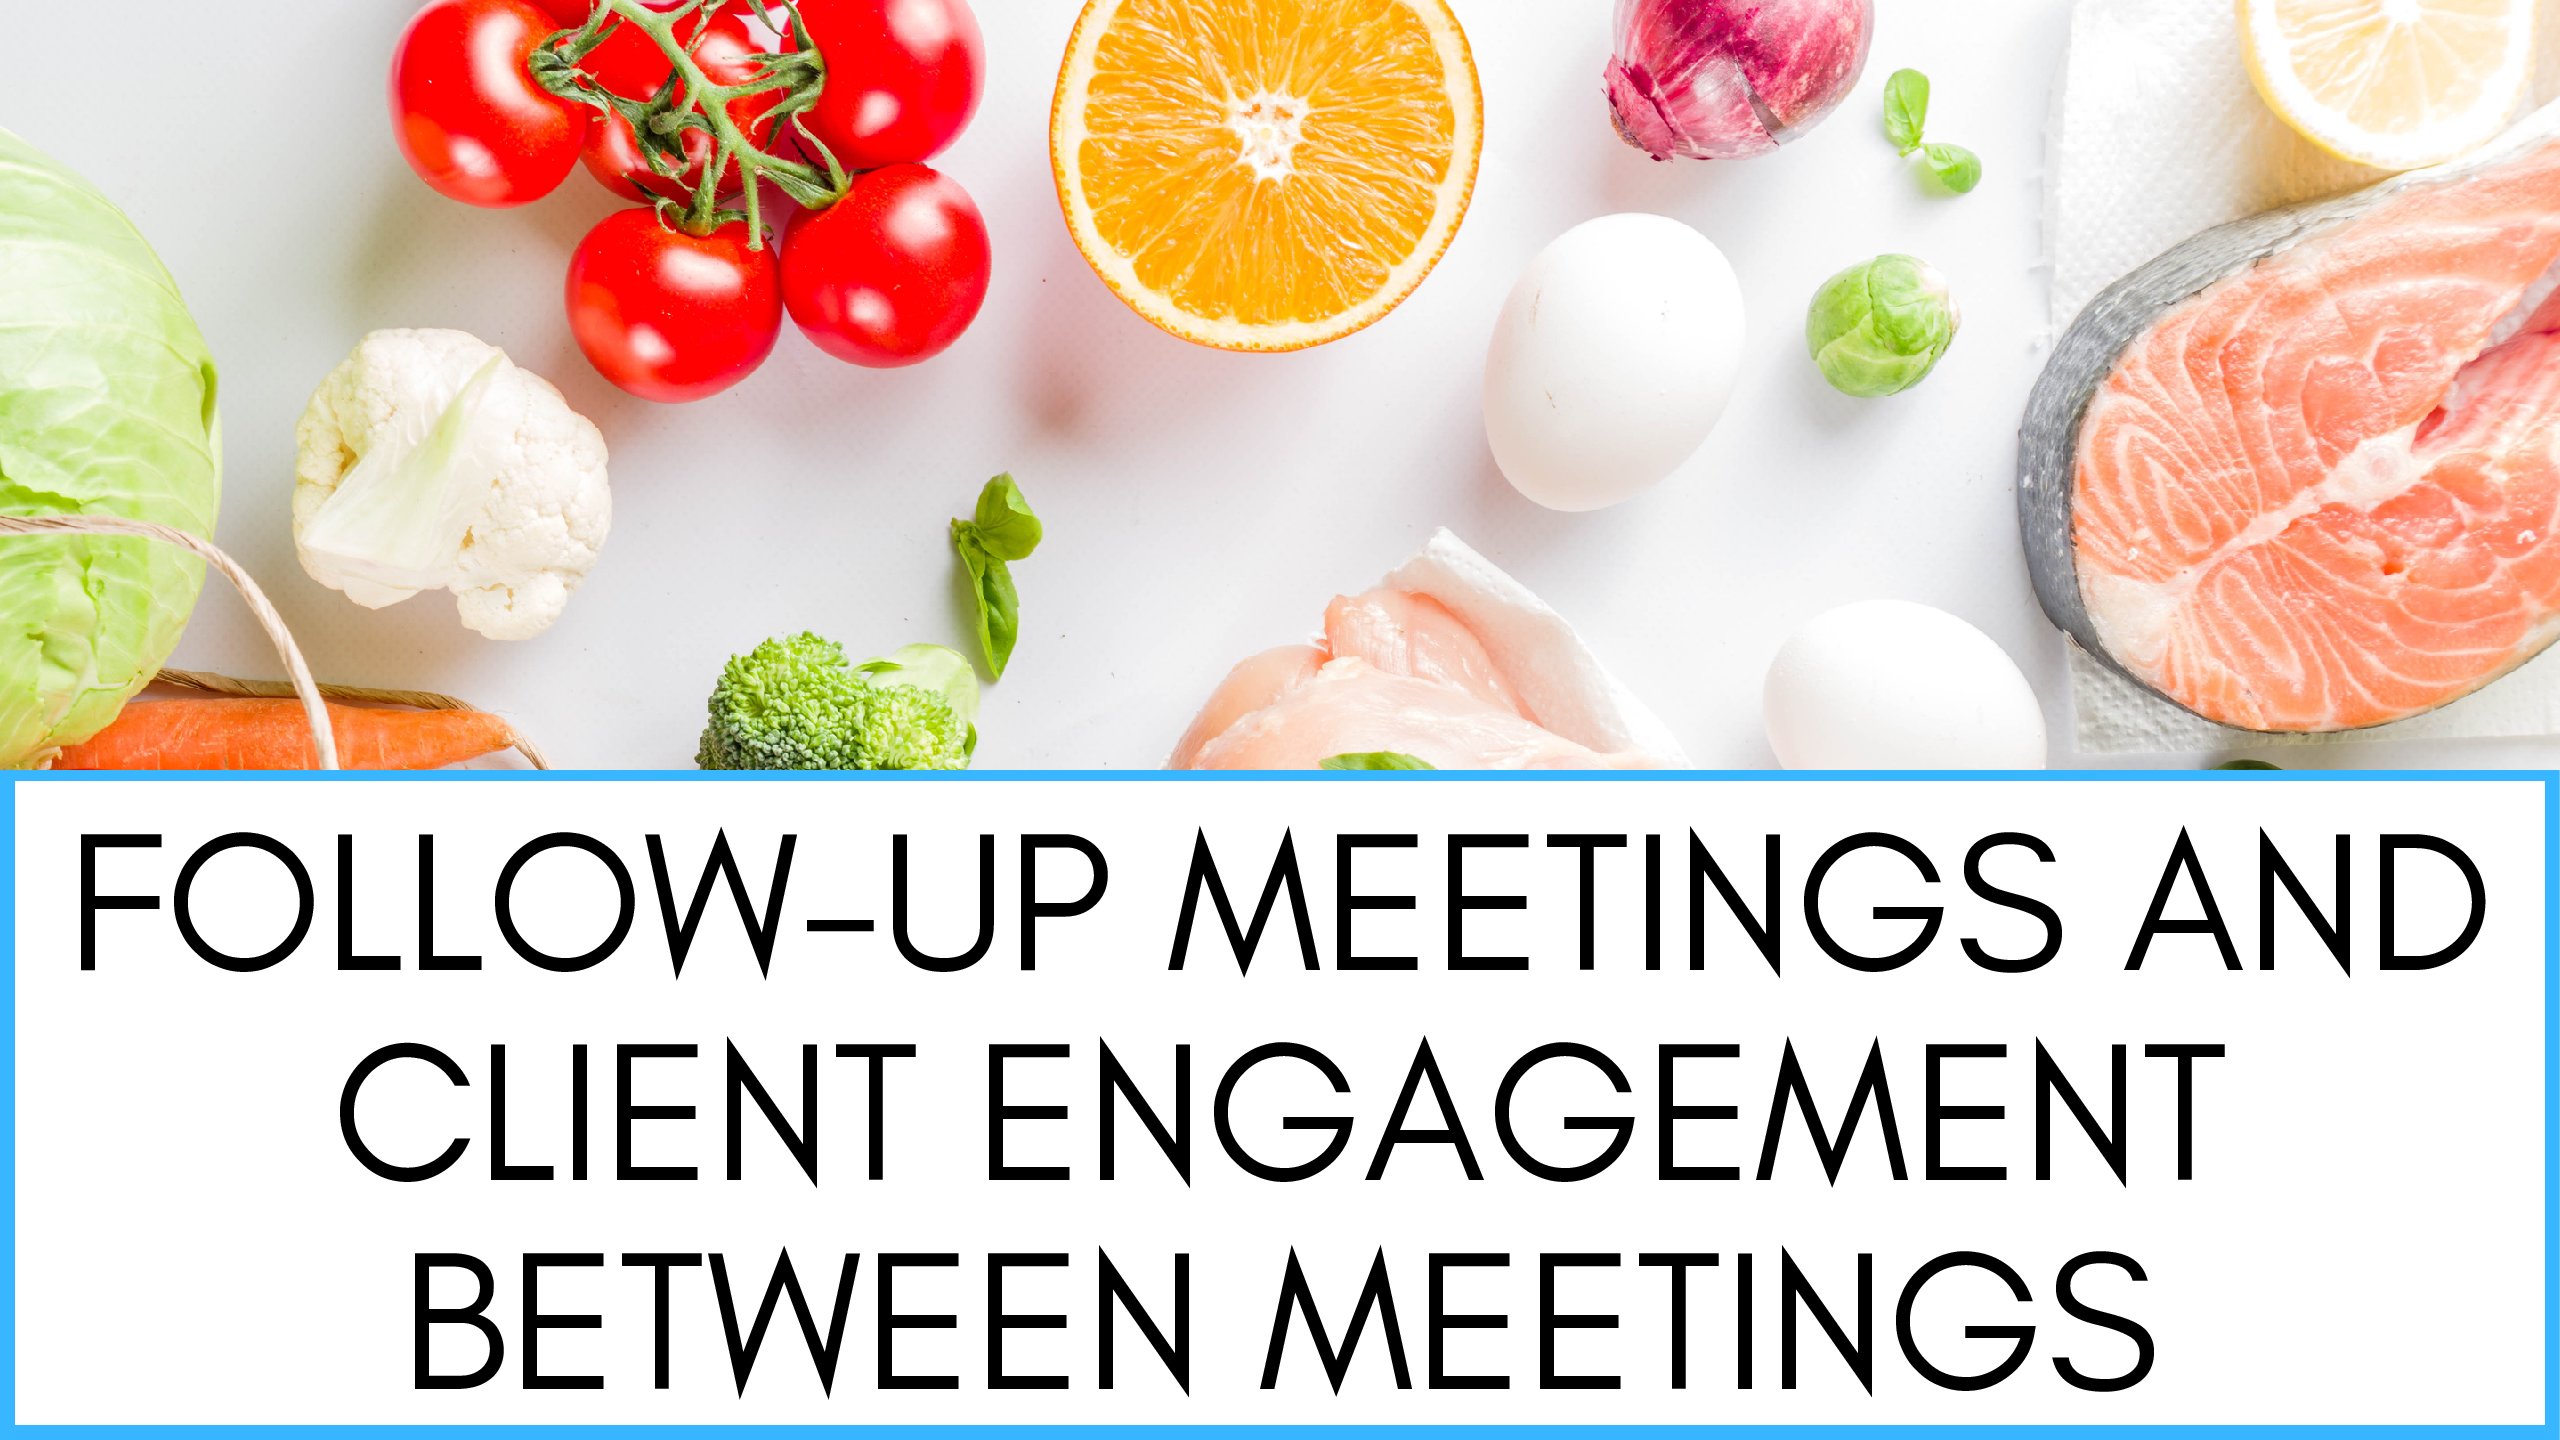 Follow-up Meetings And Client Engagement Between Meetings